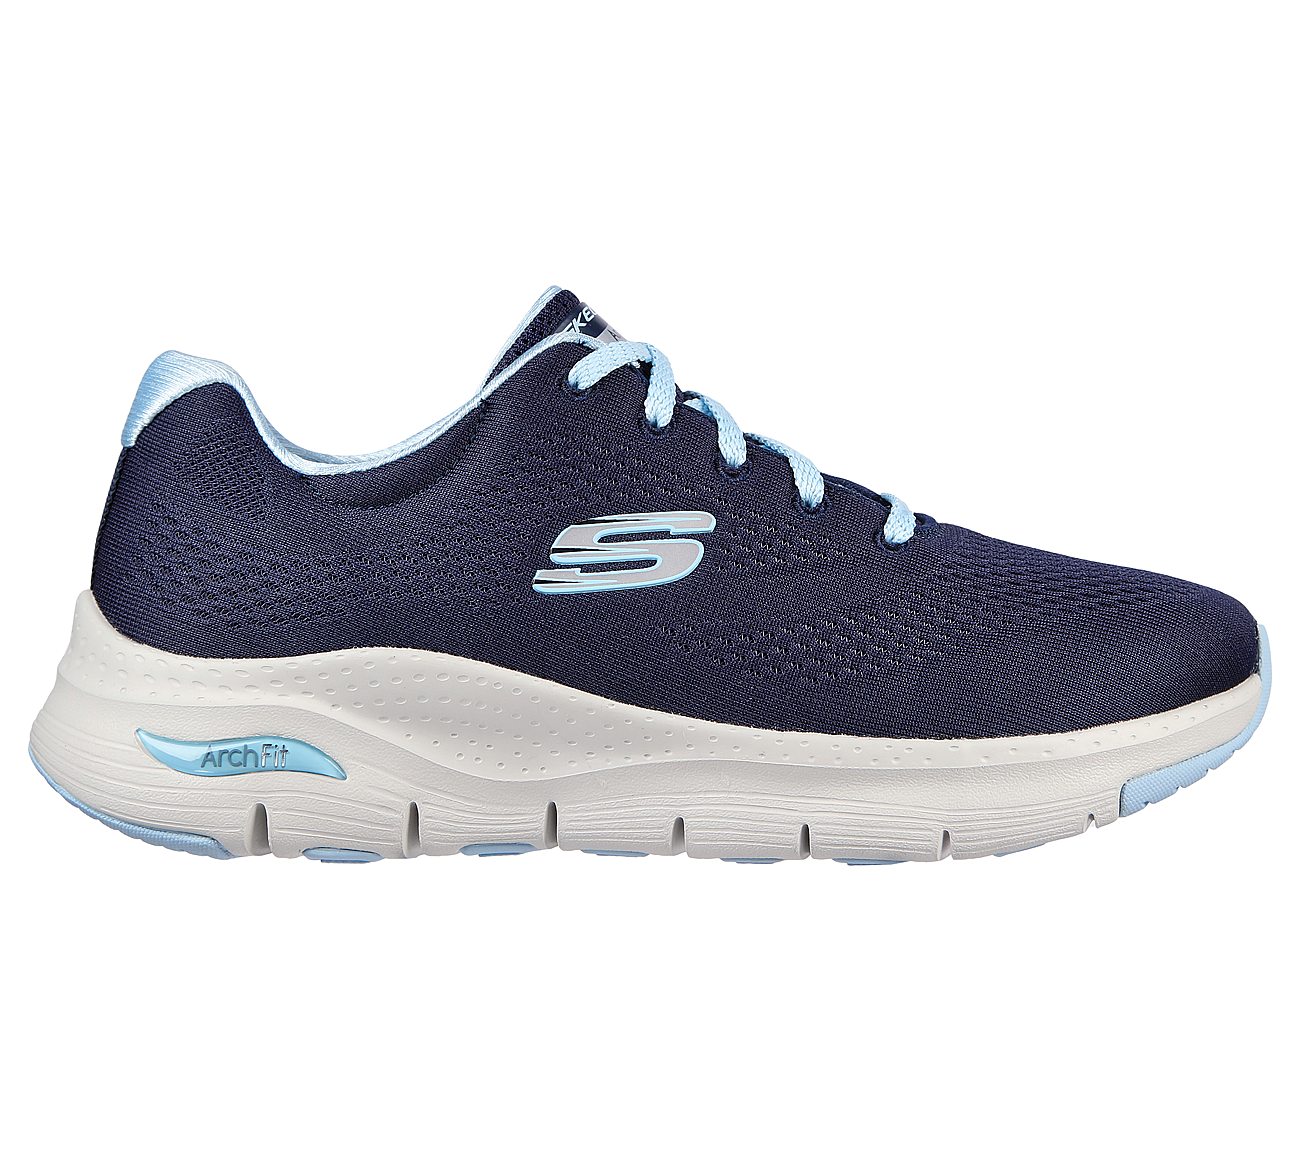 Buy SKECHERS Skechers Arch Fit - Sunny Outlook Skechers Arch Fit Shoes